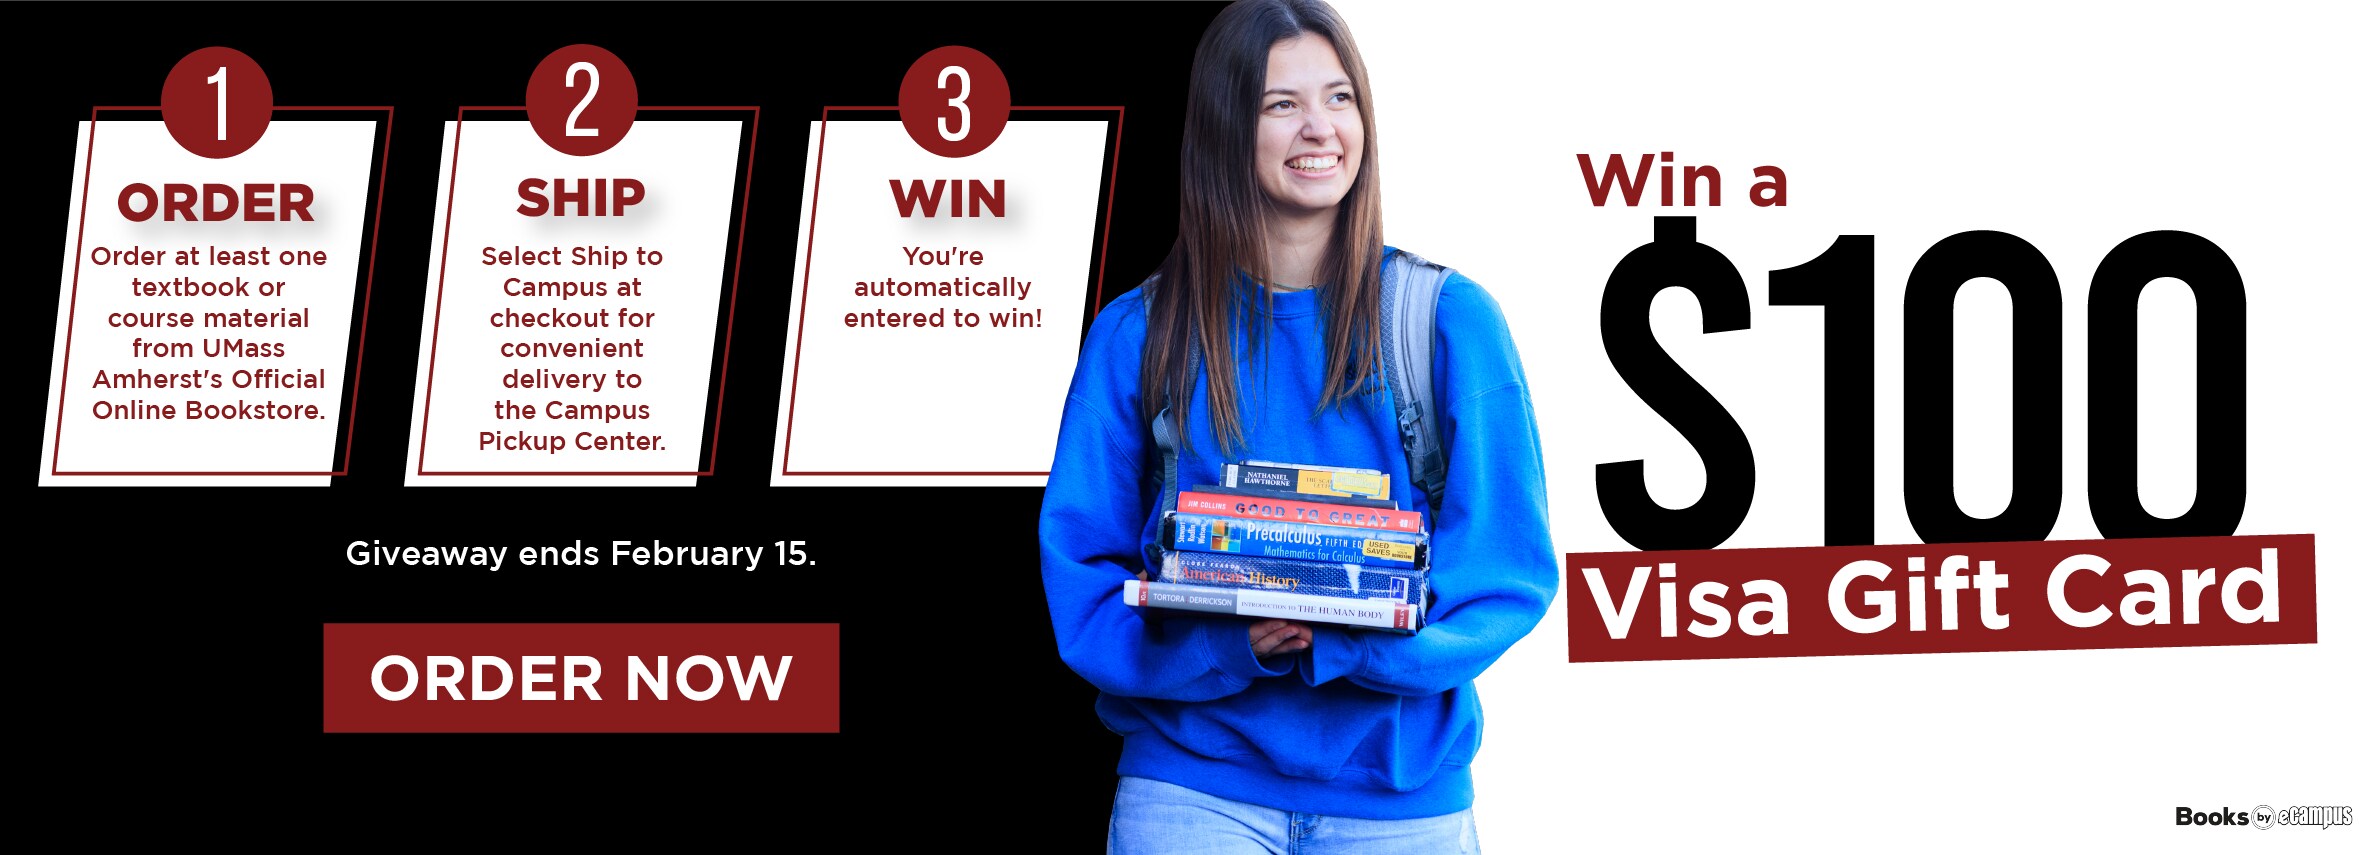 Win a $100 visa gift card. ORDER Order at least one textbook or course material from UMass Amherst's Official Online Bookstore. SHIP Select Ship to Campus at checkout for convenient delivery to the Campus Pickup Center. 3 WIN You're automatically entered to win! Giveaway ends February 15. ORDER NOW